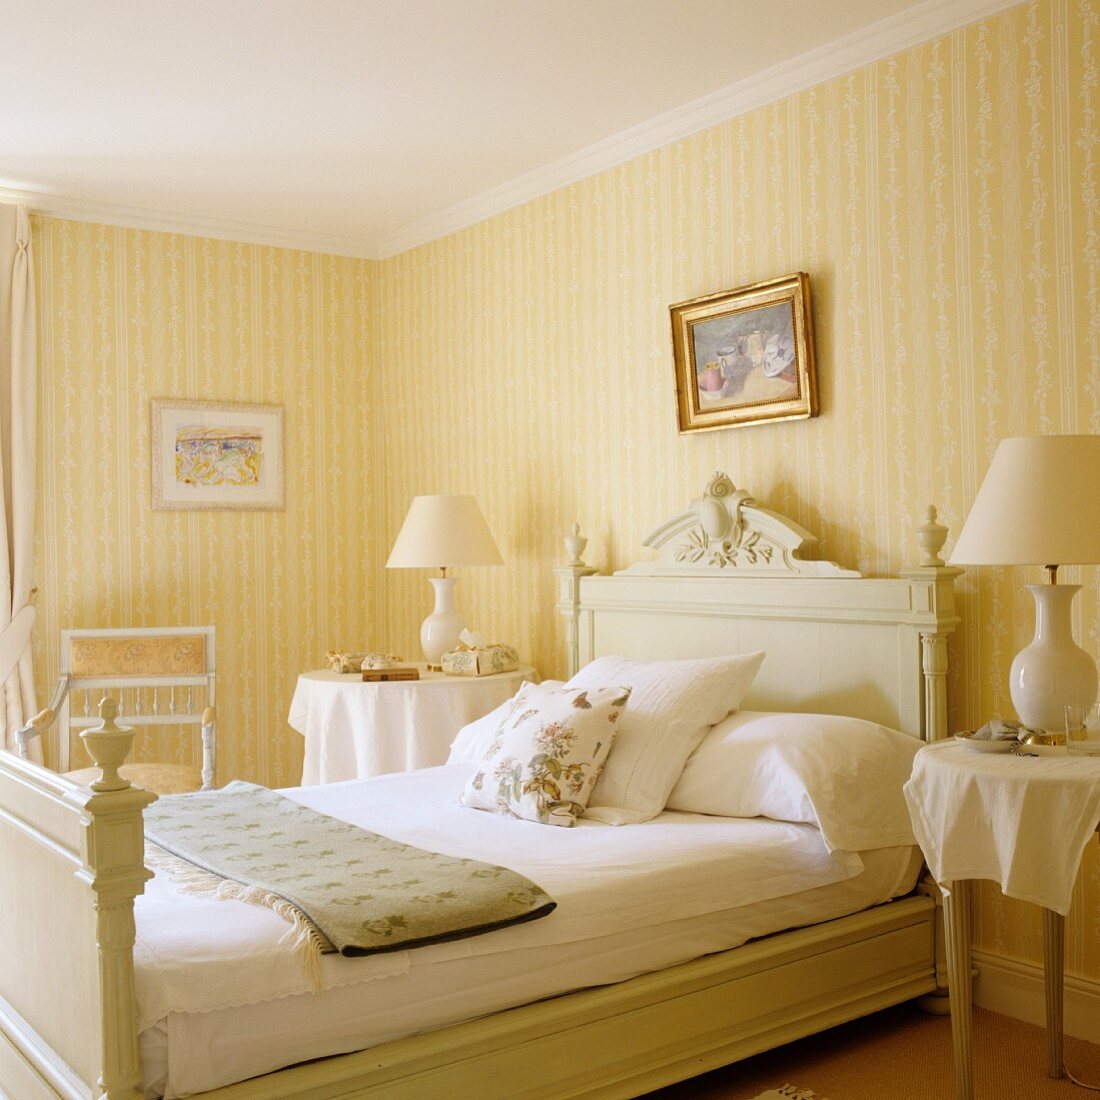 Light, traditional bedroom with yellow and white striped wallpaper